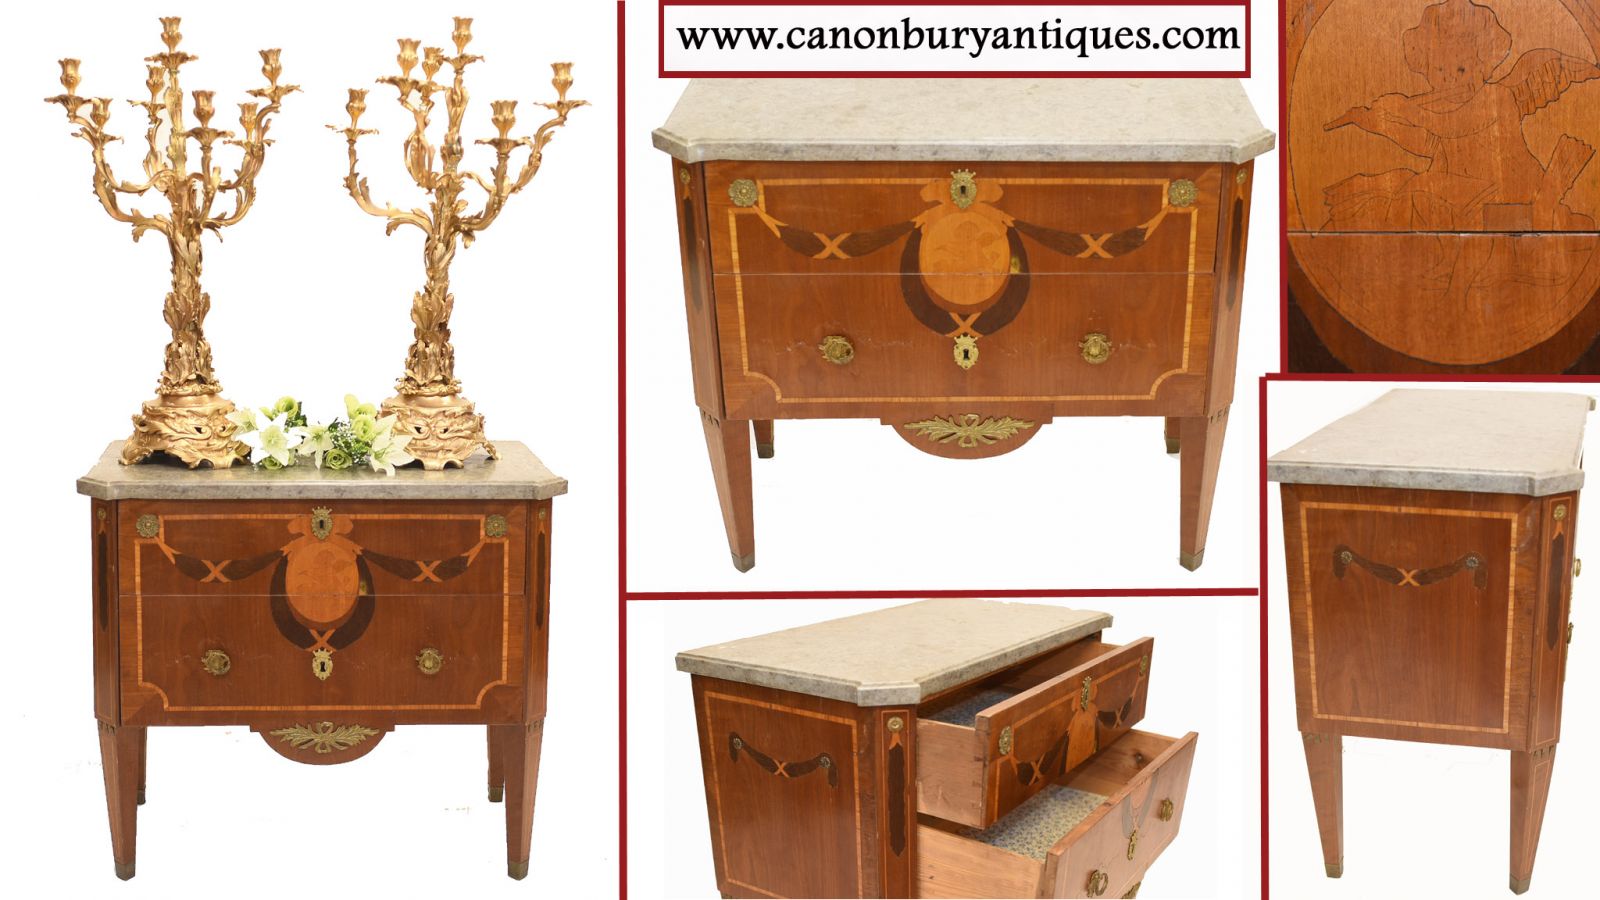 French Empire Commode Chest of Drawers - Antique with Marquetry Inlay